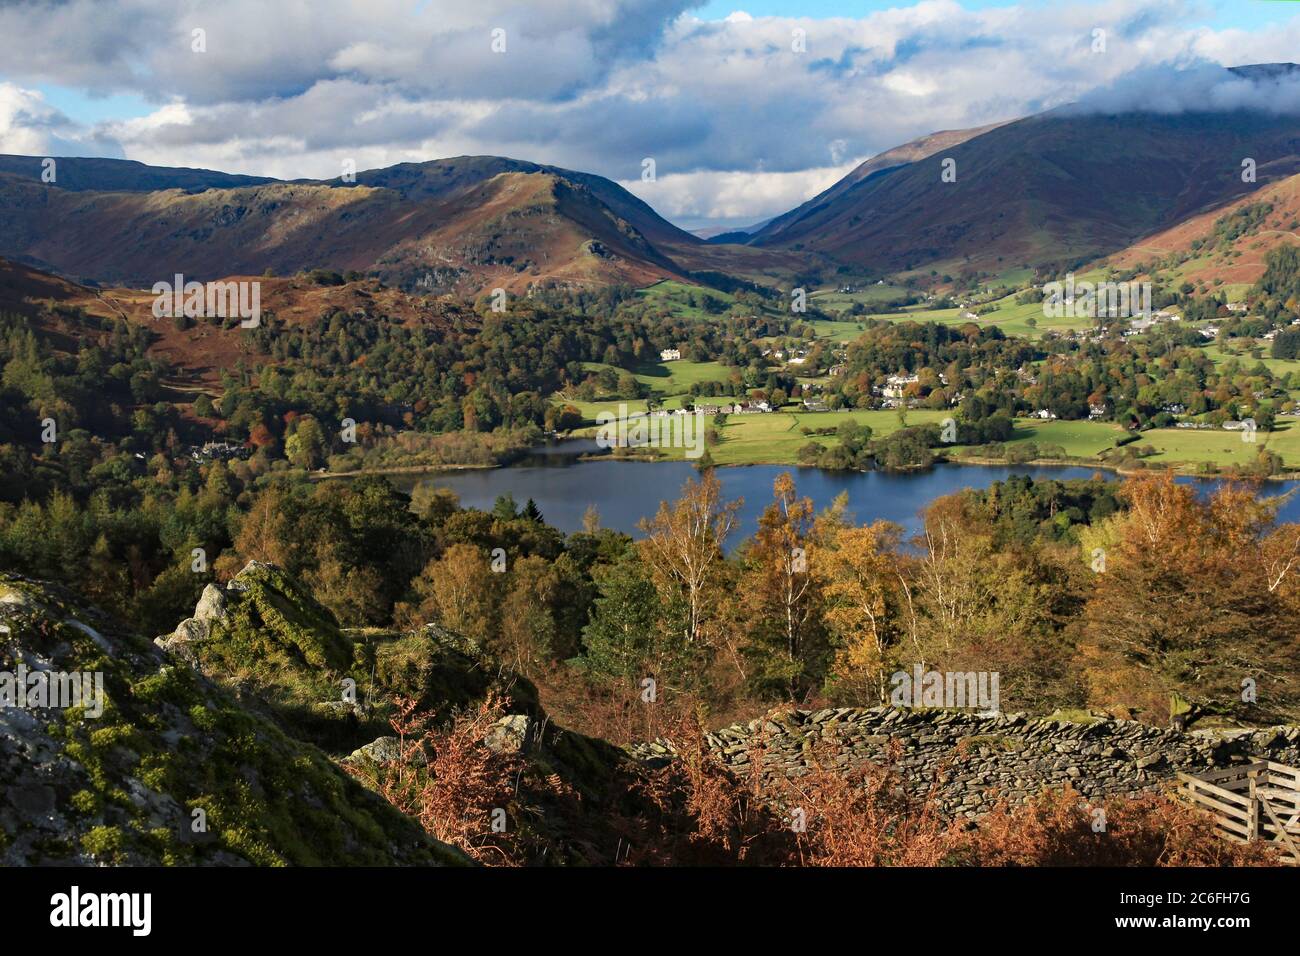 Grasmere in the foreground and upland fells of Helvellyn range in the background with trees coloured golden brown and yellow of the autumn season Stock Photo